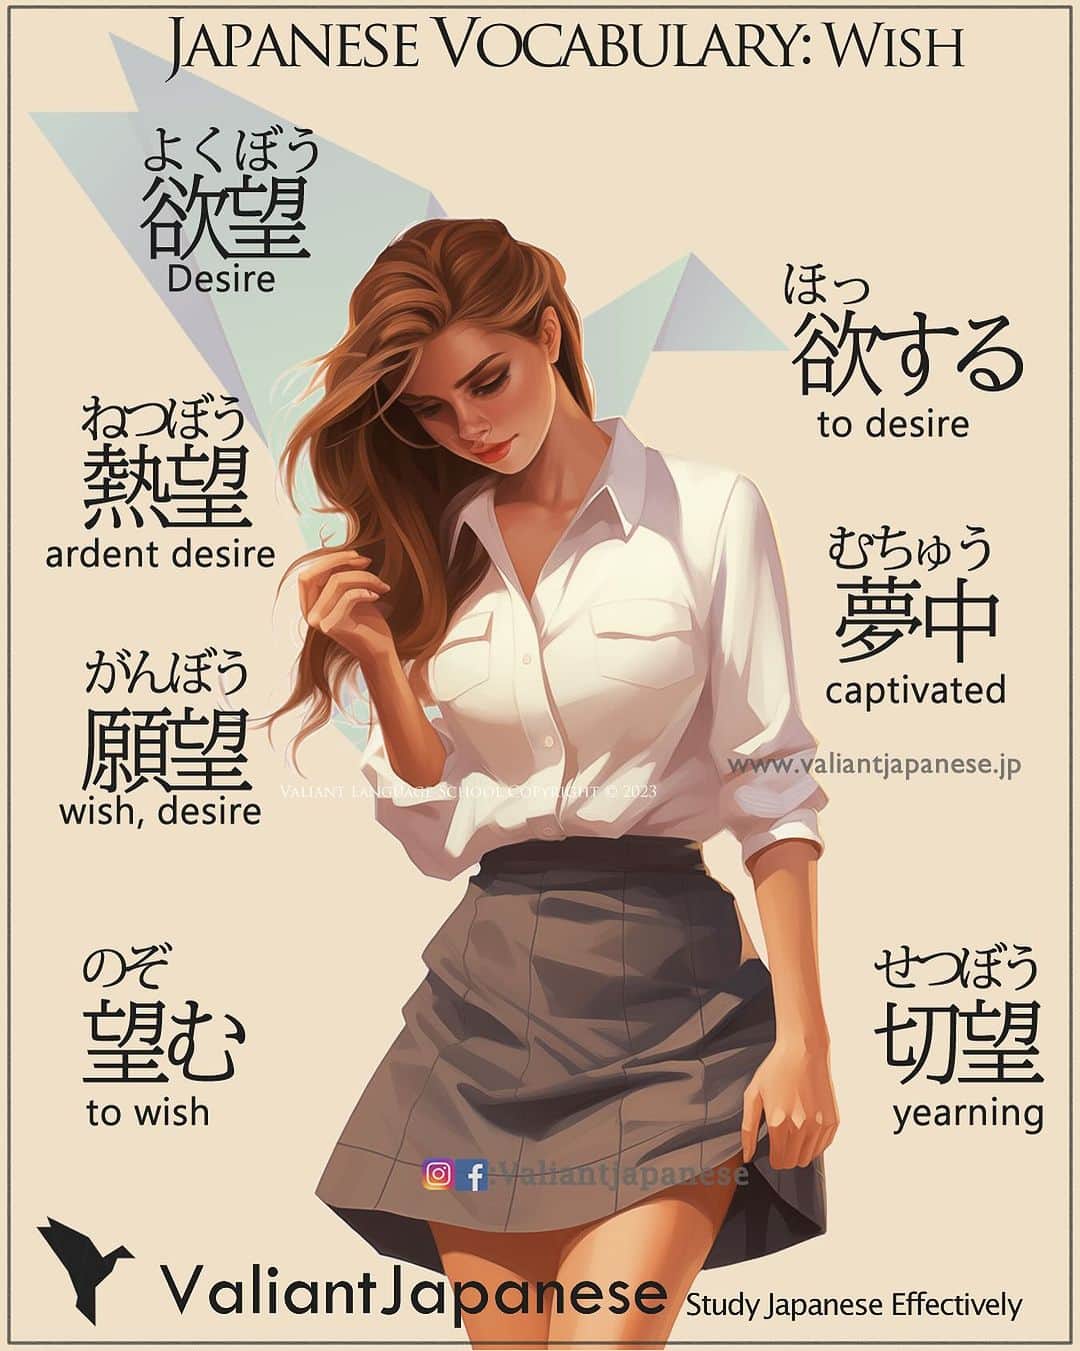 Valiant Language Schoolさんのインスタグラム写真 - (Valiant Language SchoolInstagram)「👩‍🏫:New Beginner Classes Starting November!, DM us for info  Simple Japanese : Wish 🙏 . Use code : MOMIJI To get 10% off on our shop .  Example Sentences below 👇  欲望 (Yokubou) - Meaning: "desire" or "craving"  彼は成功への強い欲望を持っています。 (Kare wa seikou e no tsuyoi yokubou o motteimasu.) Translation: He has a strong desire for success. 願望 (Ganbou) - Meaning: "wish" or "desire"  彼の願望は世界平和です。 (Kare no ganbou wa sekai heiwa desu.) Translation: His desire is world peace. 望む (Nozomu) - Meaning: "to desire" or "to wish"  彼は良い未来を望んでいます。 (Kare wa yoi mirai o nozondeimasu.) Translation: He desires a bright future. 熱望 (Netsubou) - Meaning: "ardent desire" or "longing"  彼女は熱望していた夢を叶えました。 (Kanojo wa netsubou shiteita yume o kanaemashita.) Translation: She fulfilled the dream she ardently desired. 欲する (Hossuru) - Meaning: "to desire" or "to want"  彼は成功を欲しています。 (Kare wa seikou o hoshiteimasu.) Translation: He desires success. 切望 (Setsubou) - Meaning: "earnest desire" or "yearning"  その瞬間を切望していました。 (Sono shunkan o setsubou shiteimasu.) Translation: He was yearning for that moment. 夢中 (Muchuu) - Meaning: "intensely interested" or "captivated"  彼は音楽に夢中です。 (Kare wa ongaku ni muchuu desu.) Translation: He is intensely interested in music. 欲望に満ちた (Yokubou ni michita) - Meaning: "full of desire" or "lustful"  その小説は欲望に満ちたストーリーでした。 (Sono shousetsu wa yokubou ni michita sutoorii deshita.) Translation: The novel was a story full of desire.  #tshirts  #shinjuku  #新宿 #東京 #tokyo」11月10日 17時03分 - valiantjapanese